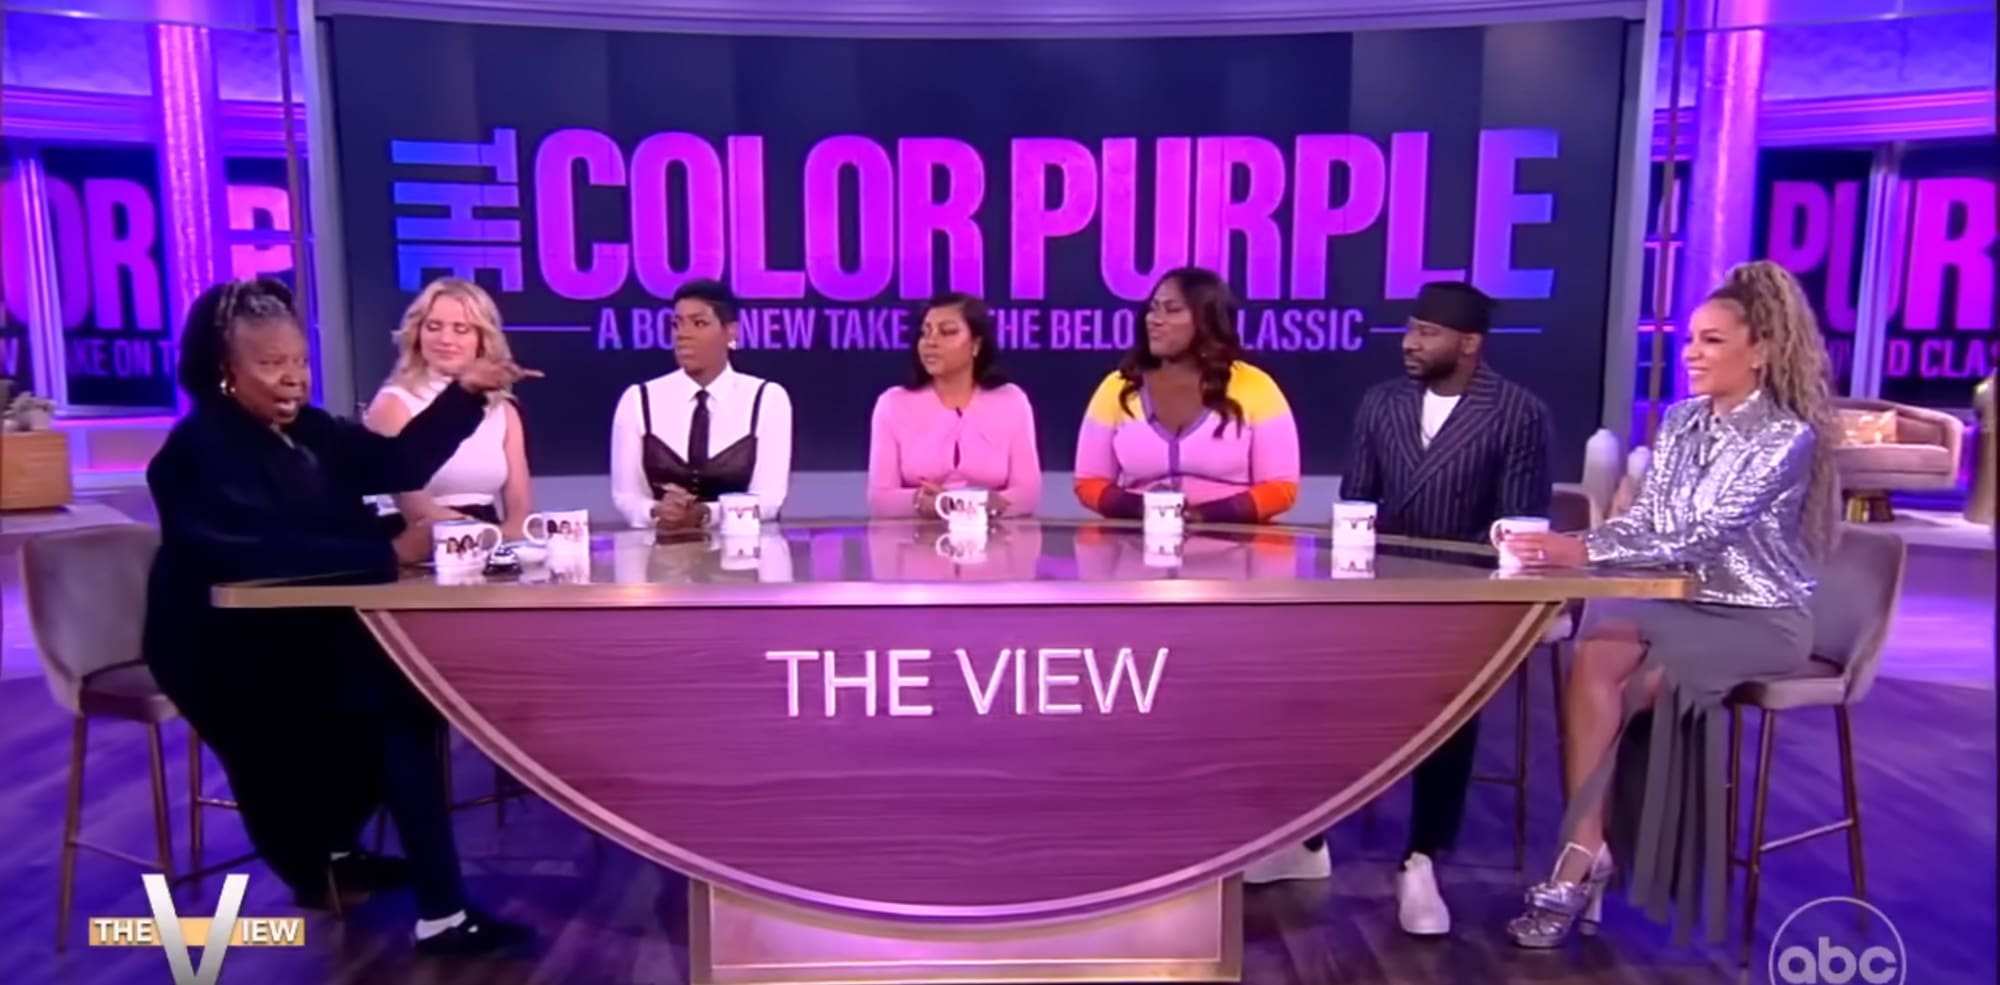 Did Oprah Winfrey Diss ‘The View’ During ‘Color Purple’ Promo Run? ‘The